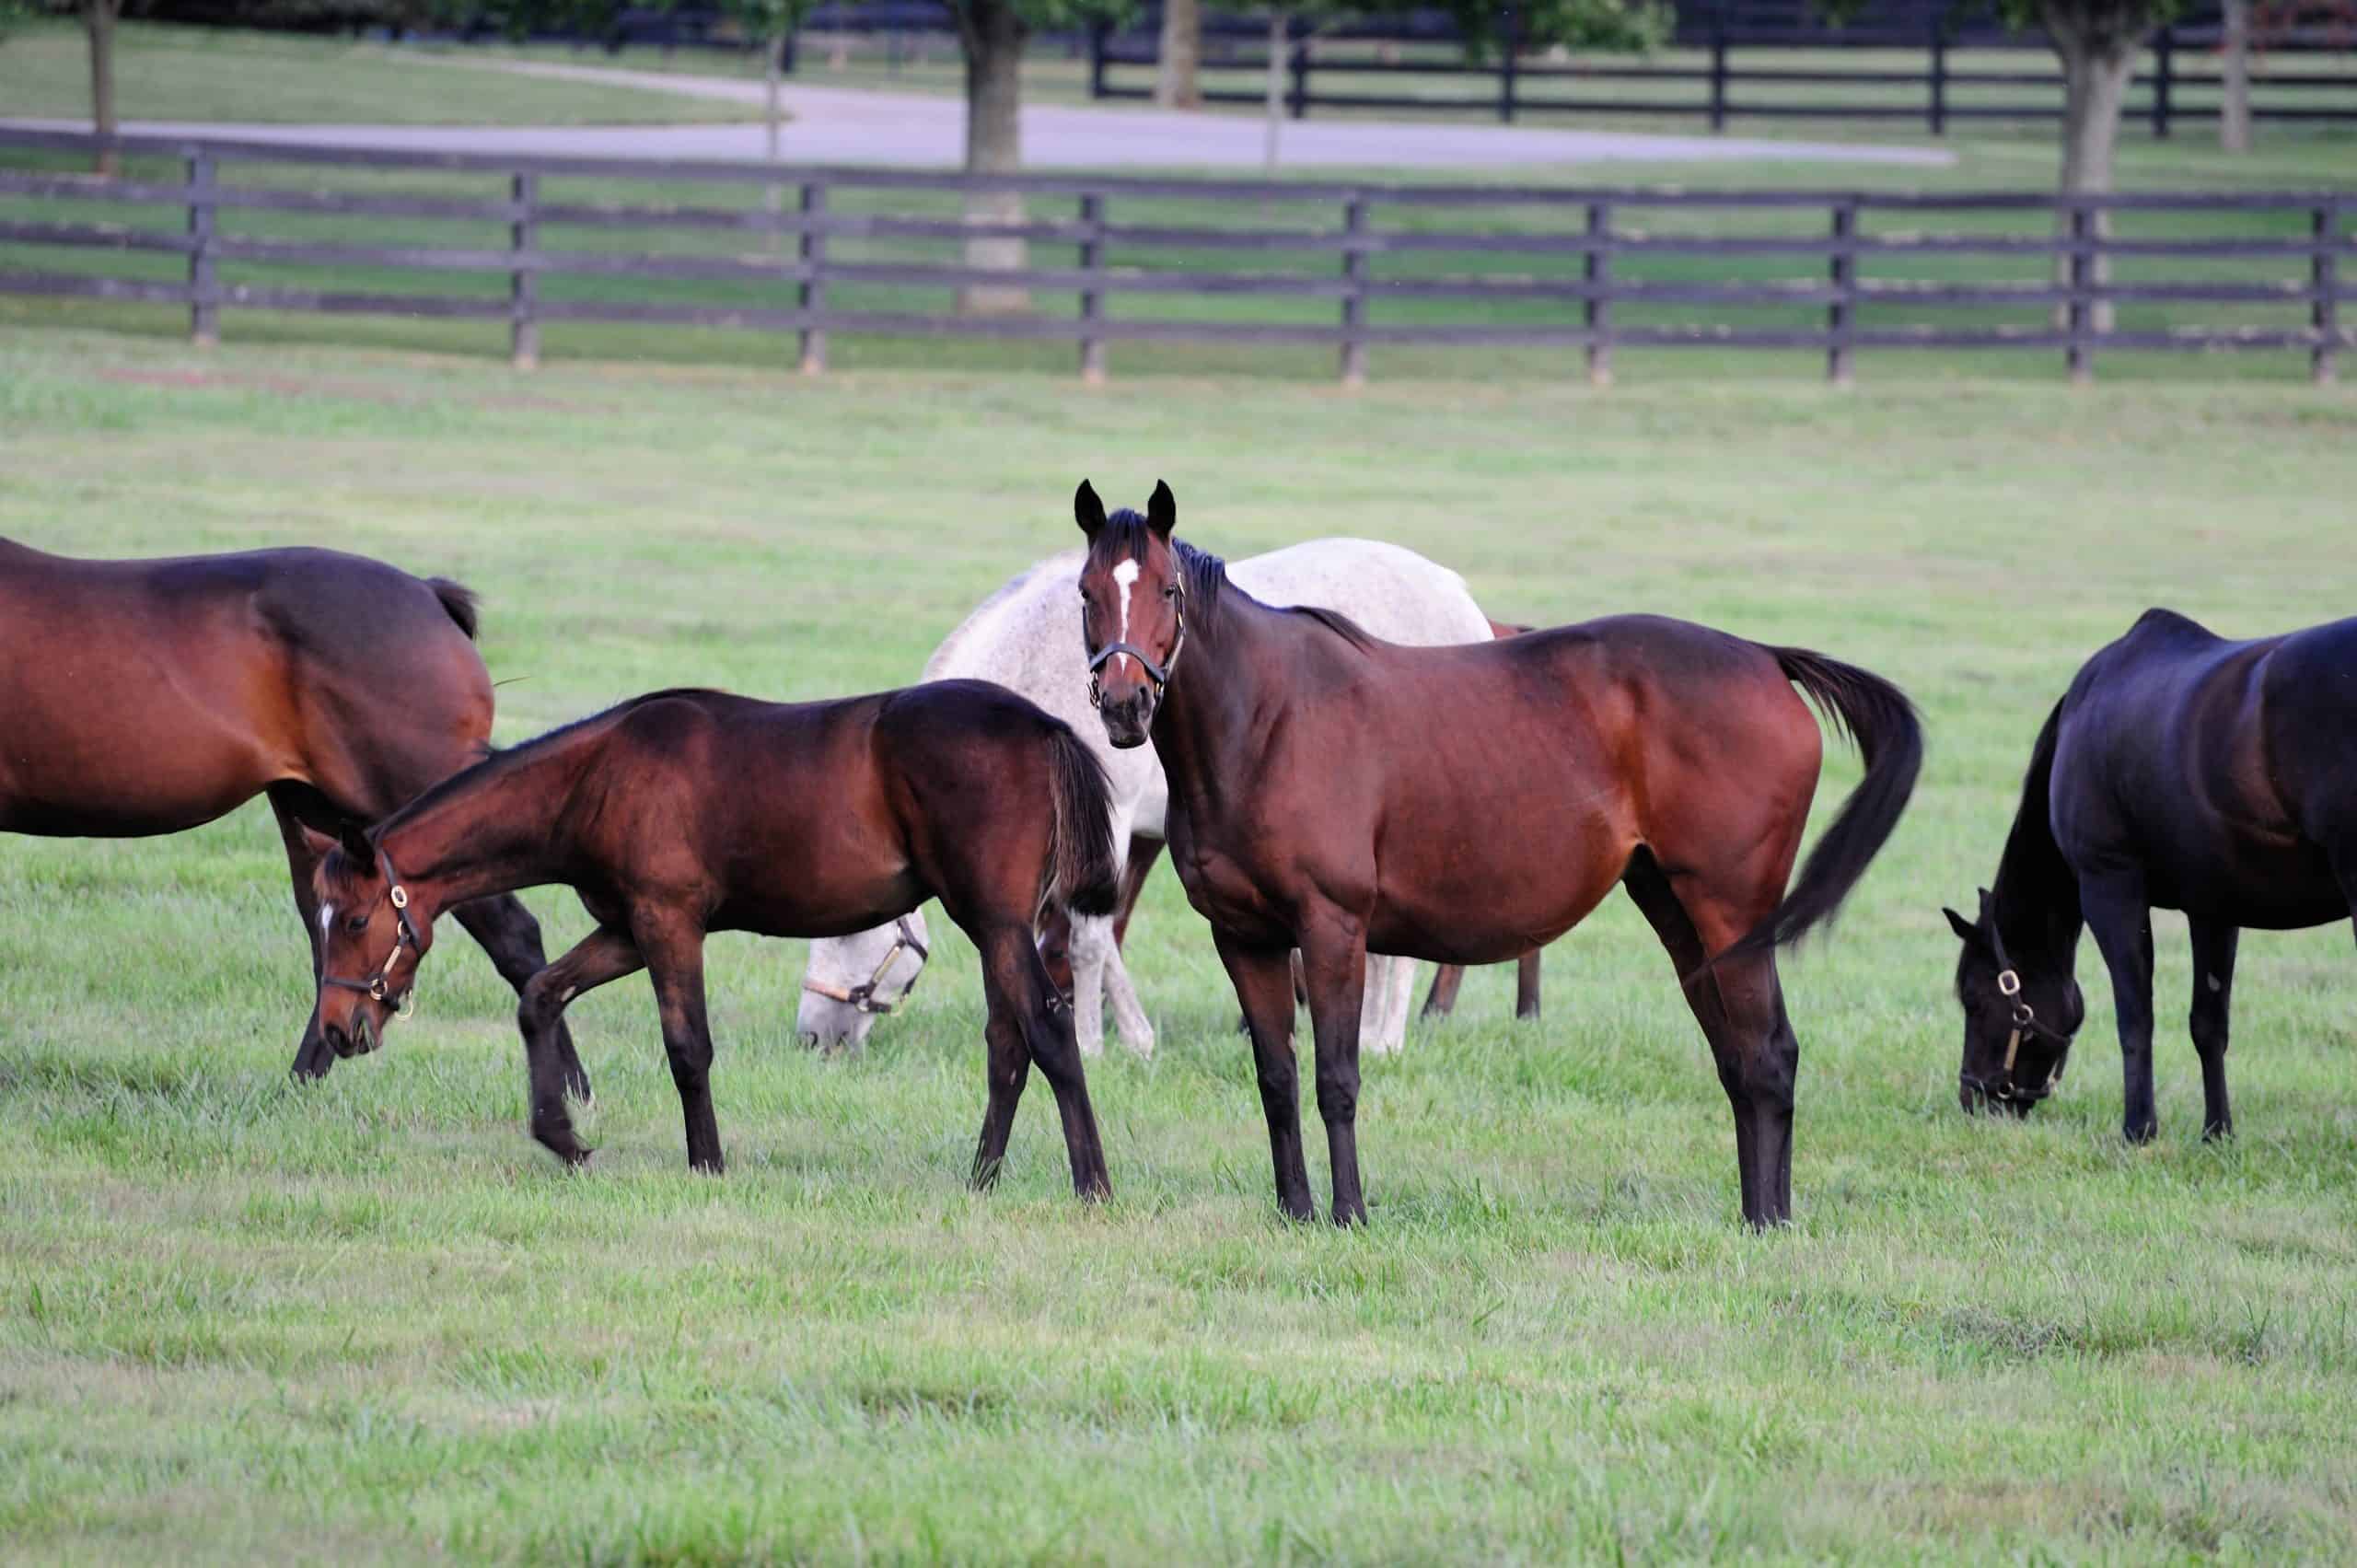 estimate horse weight Thoroughbred horses on a horse farm in Kentucky (USA)